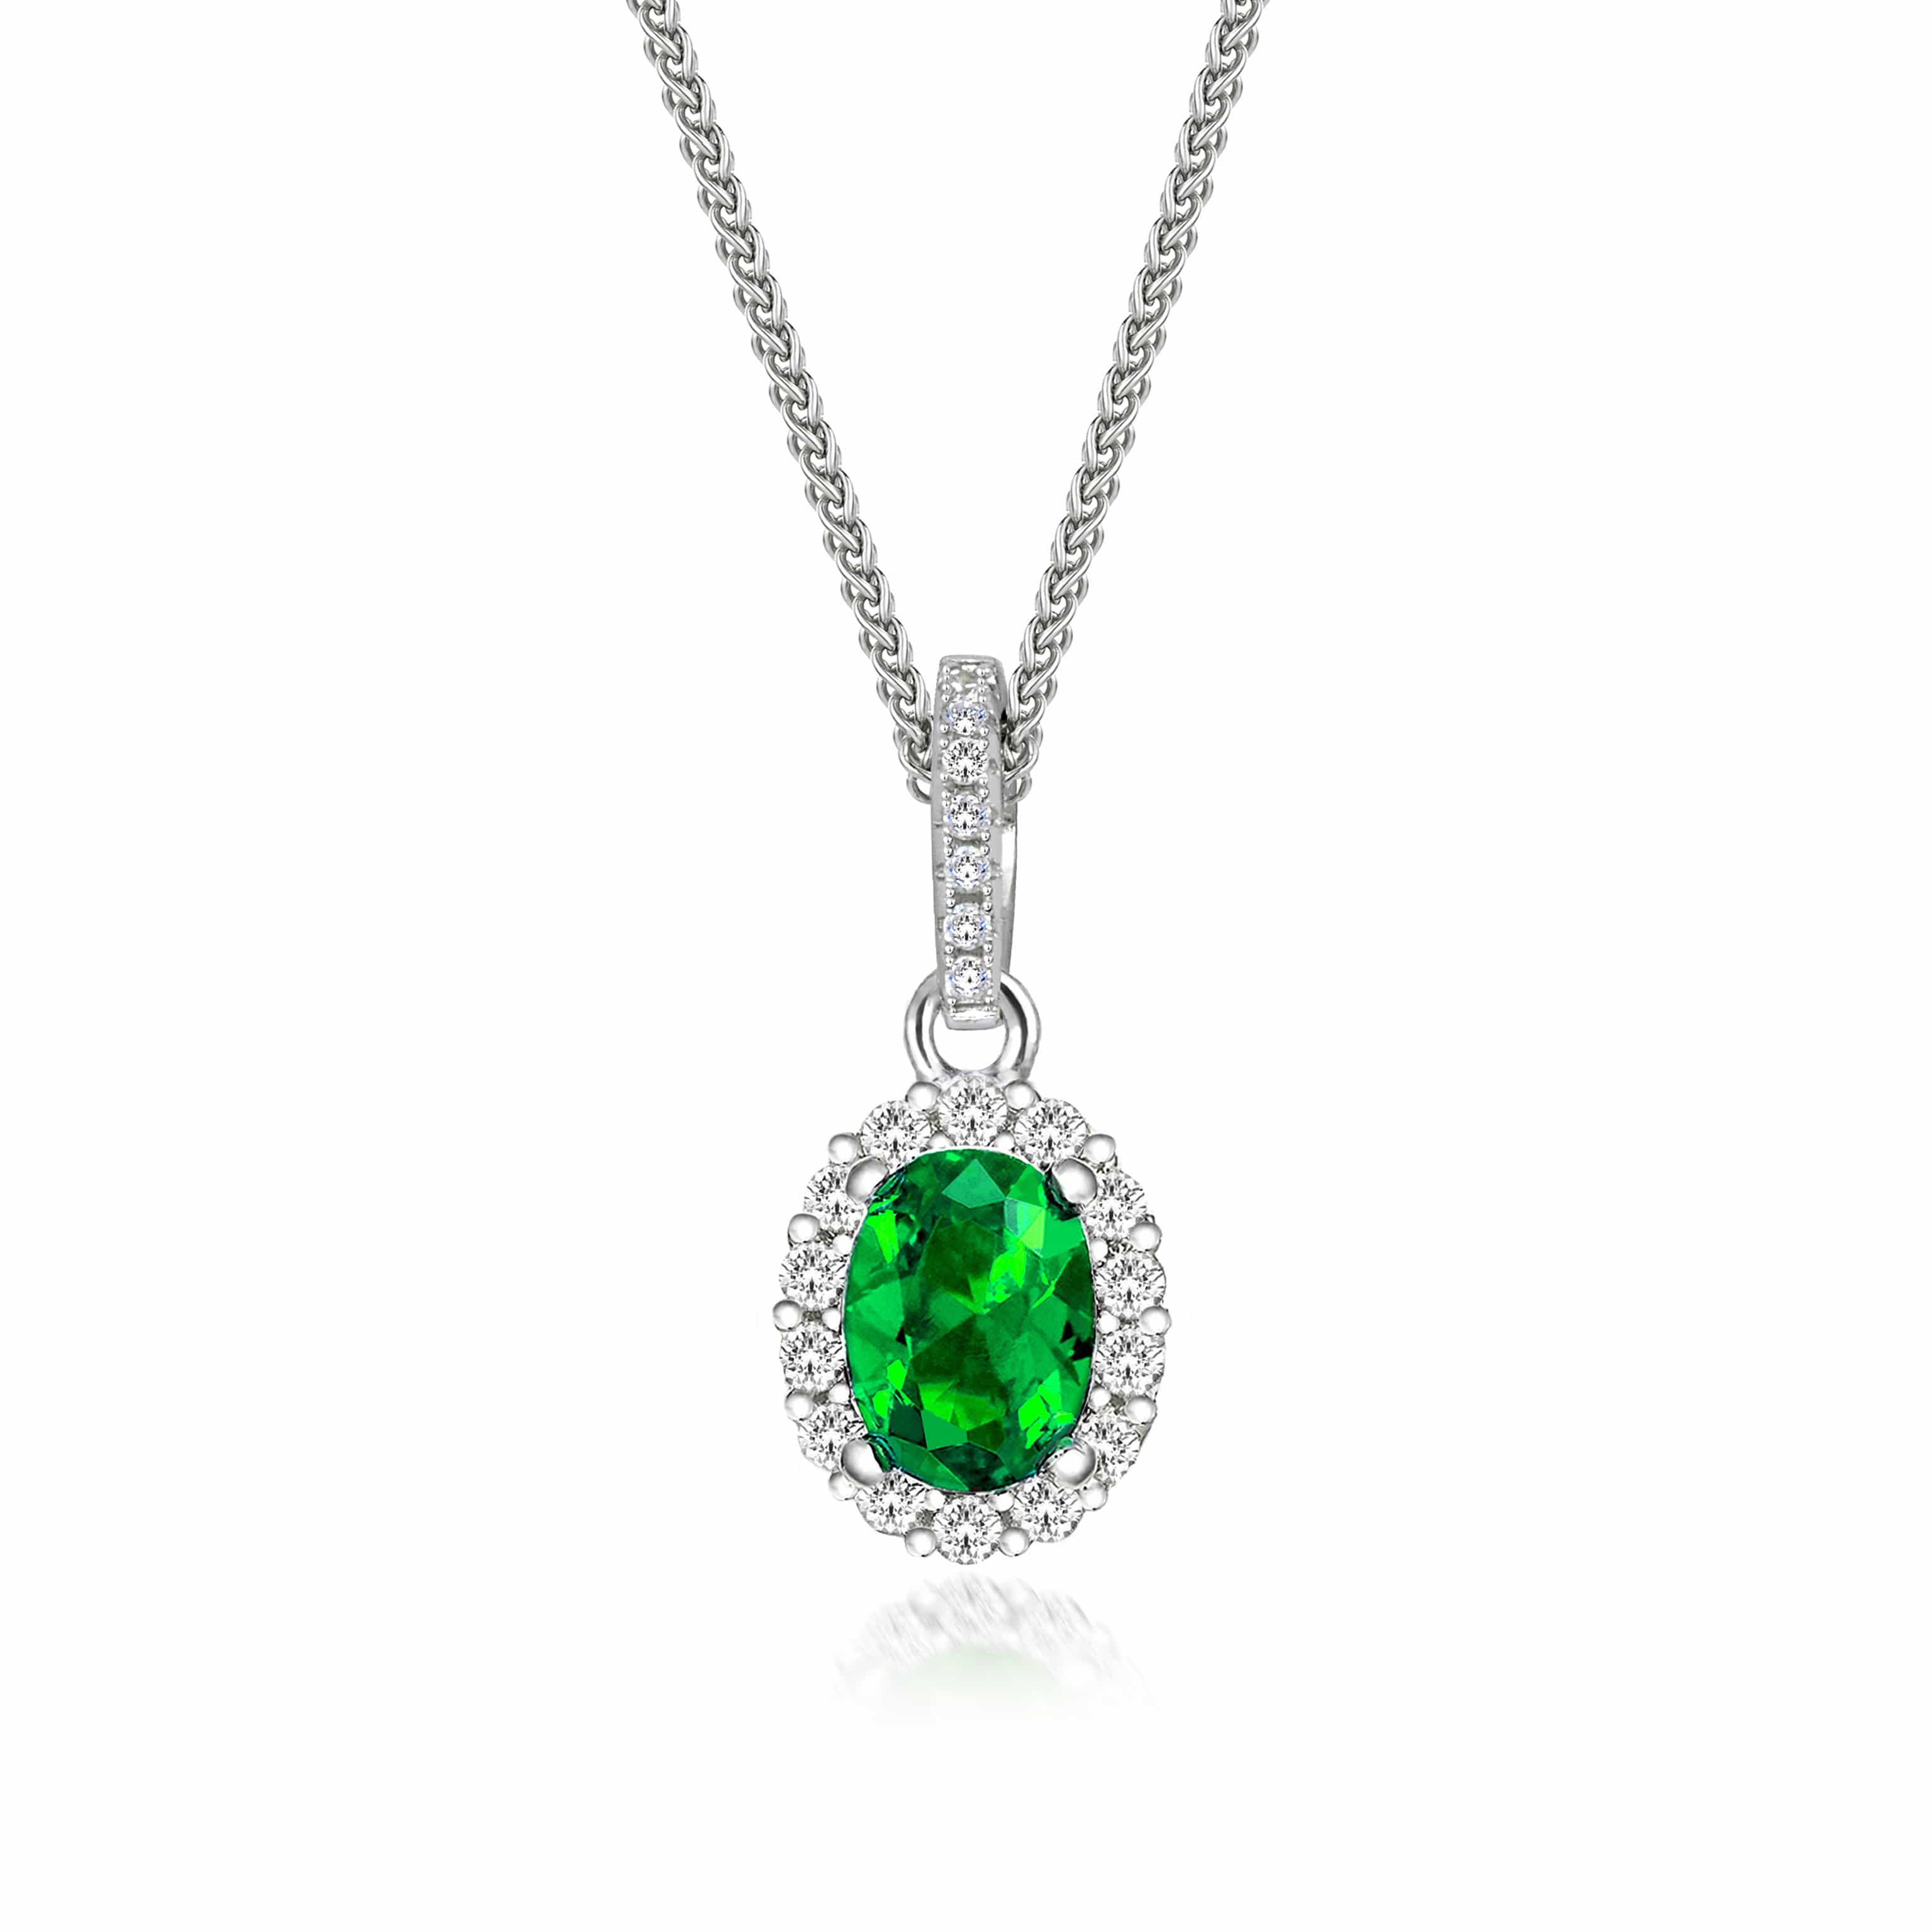 Opulence Necklace Sterling Silver & Emerald Stone